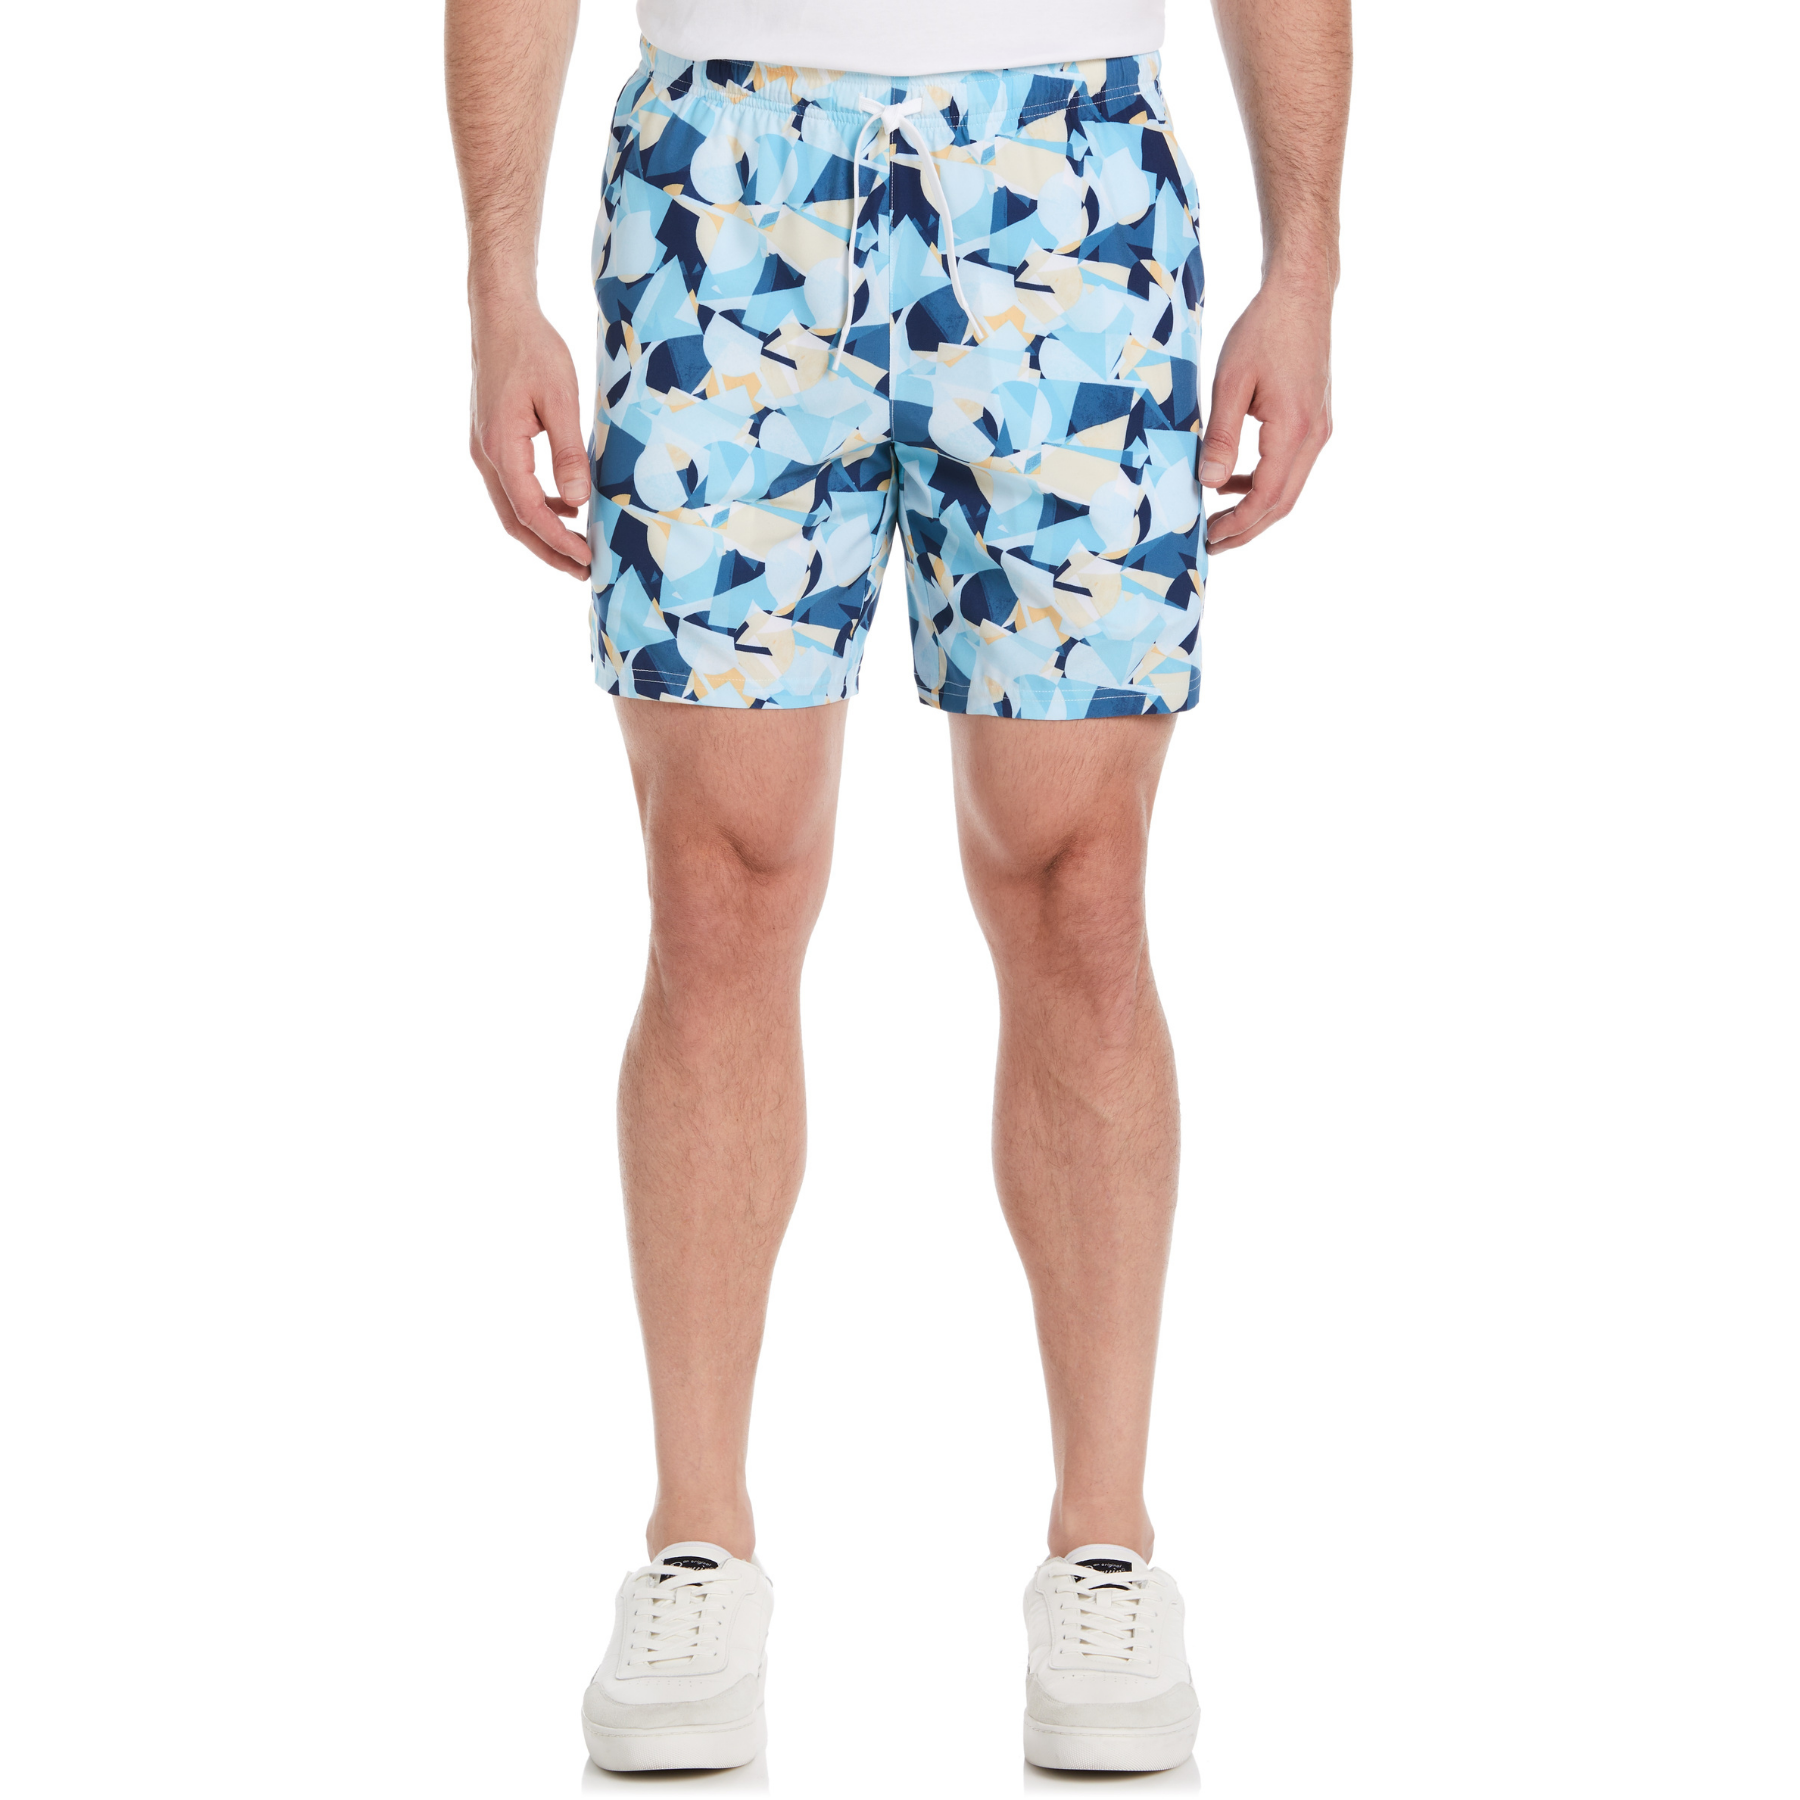 View Performance Layered Print Tennis Shorts In Bright White information